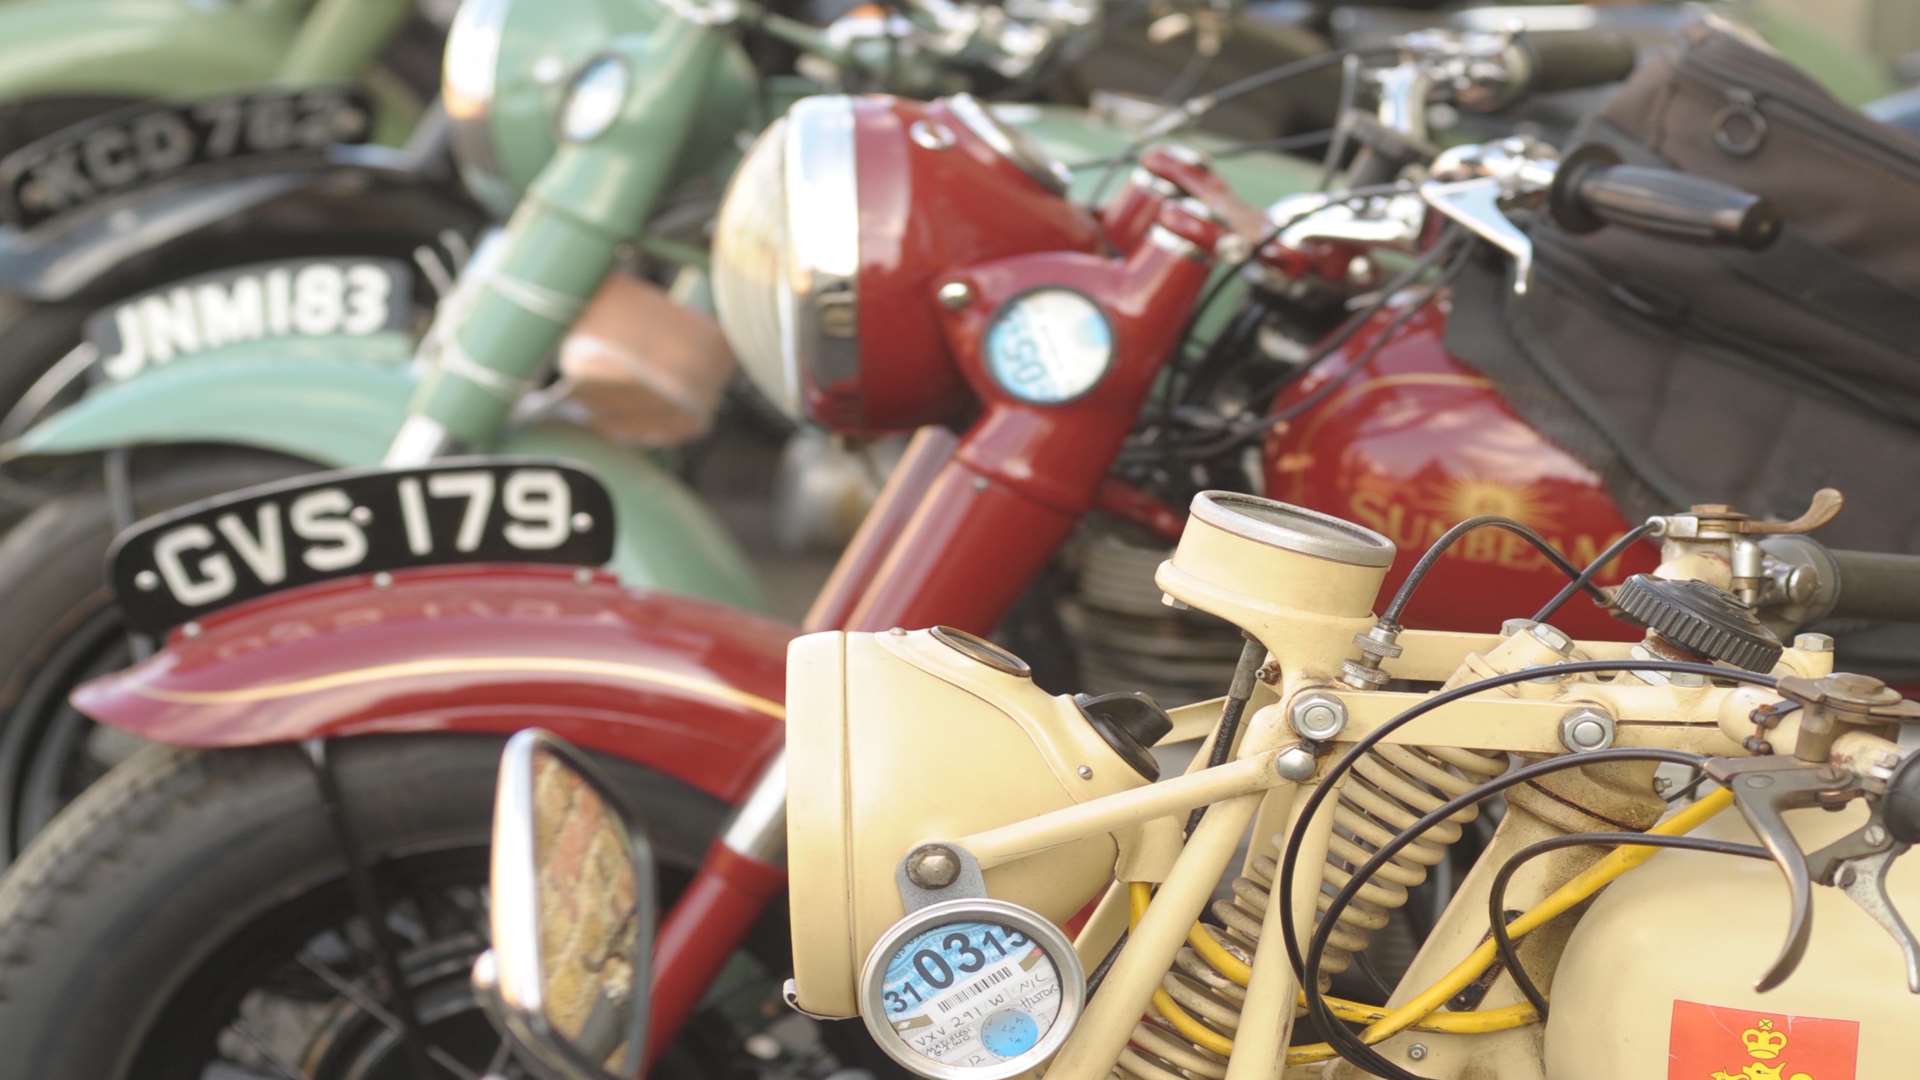 There will be lots of vintage vehicles on show at the Salute to the '40s